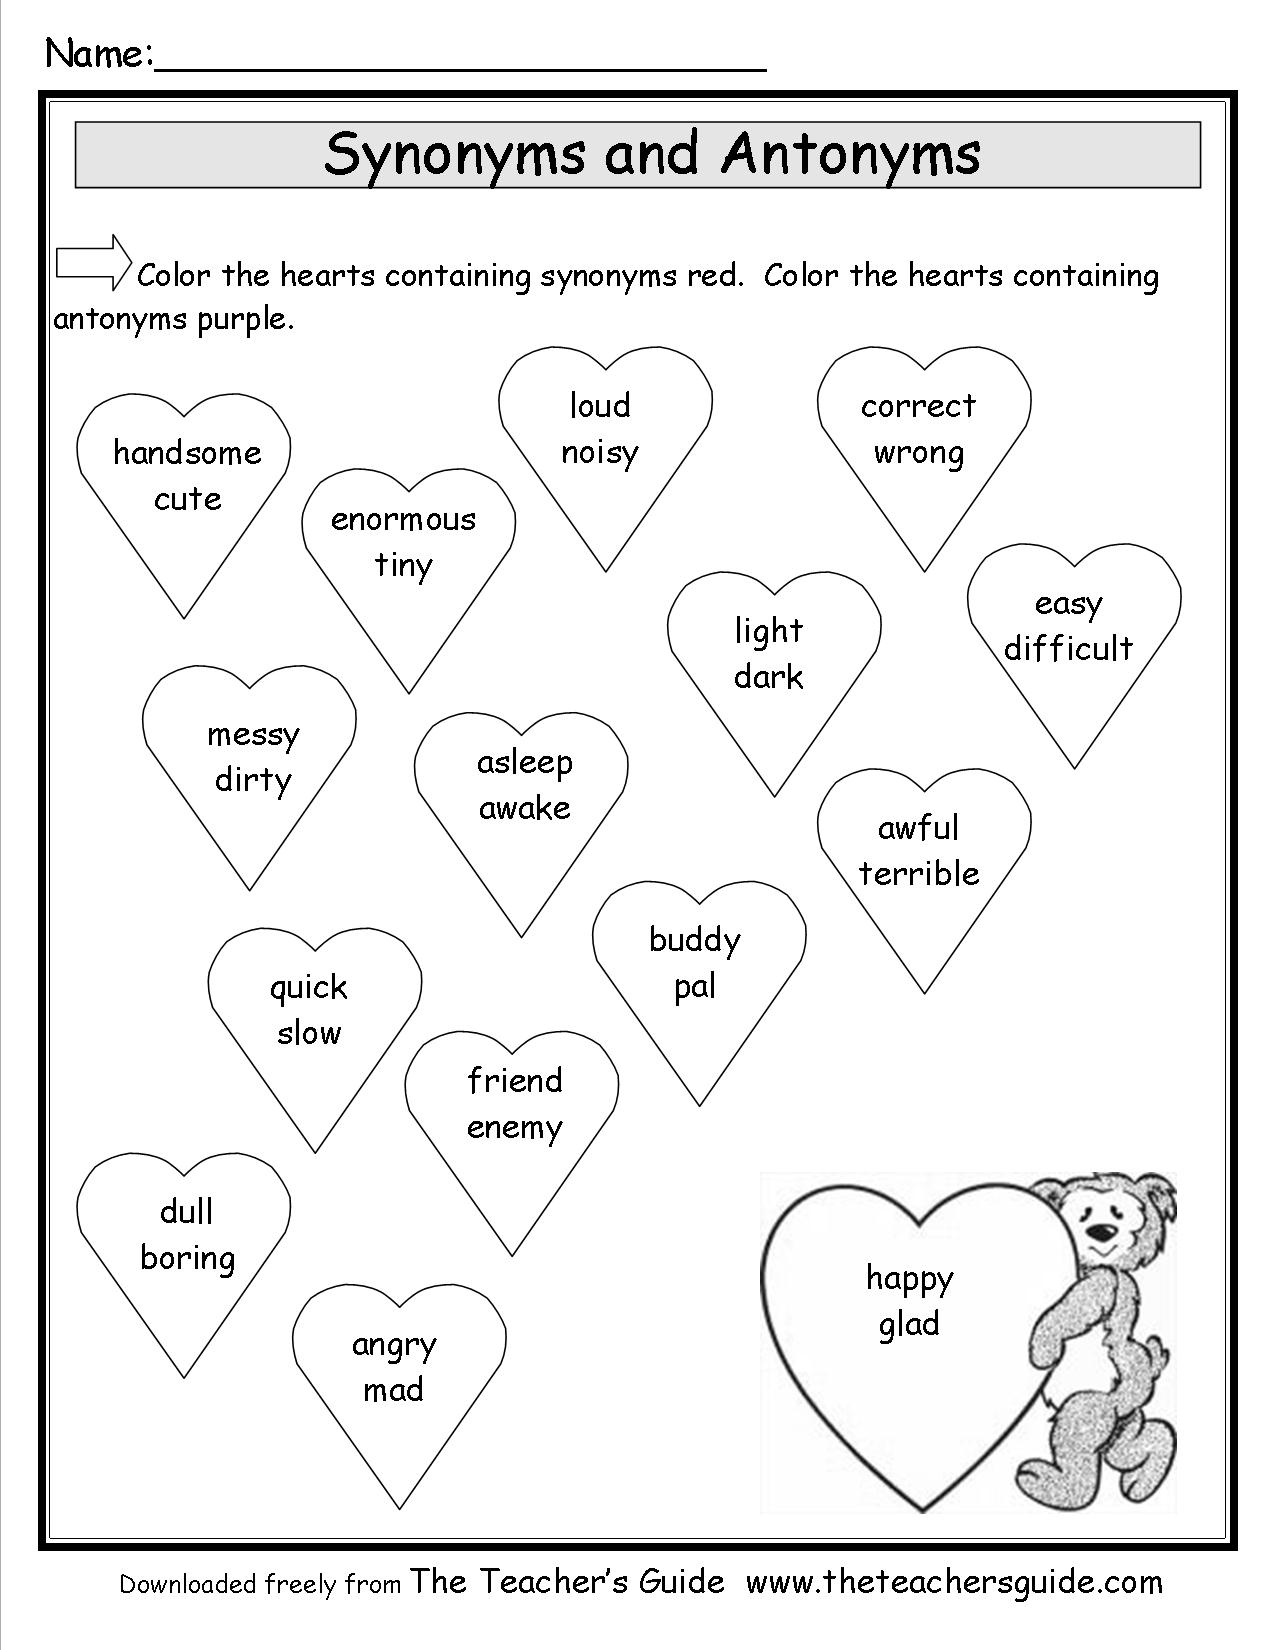 Synonyms and Antonyms Worksheet Coloring